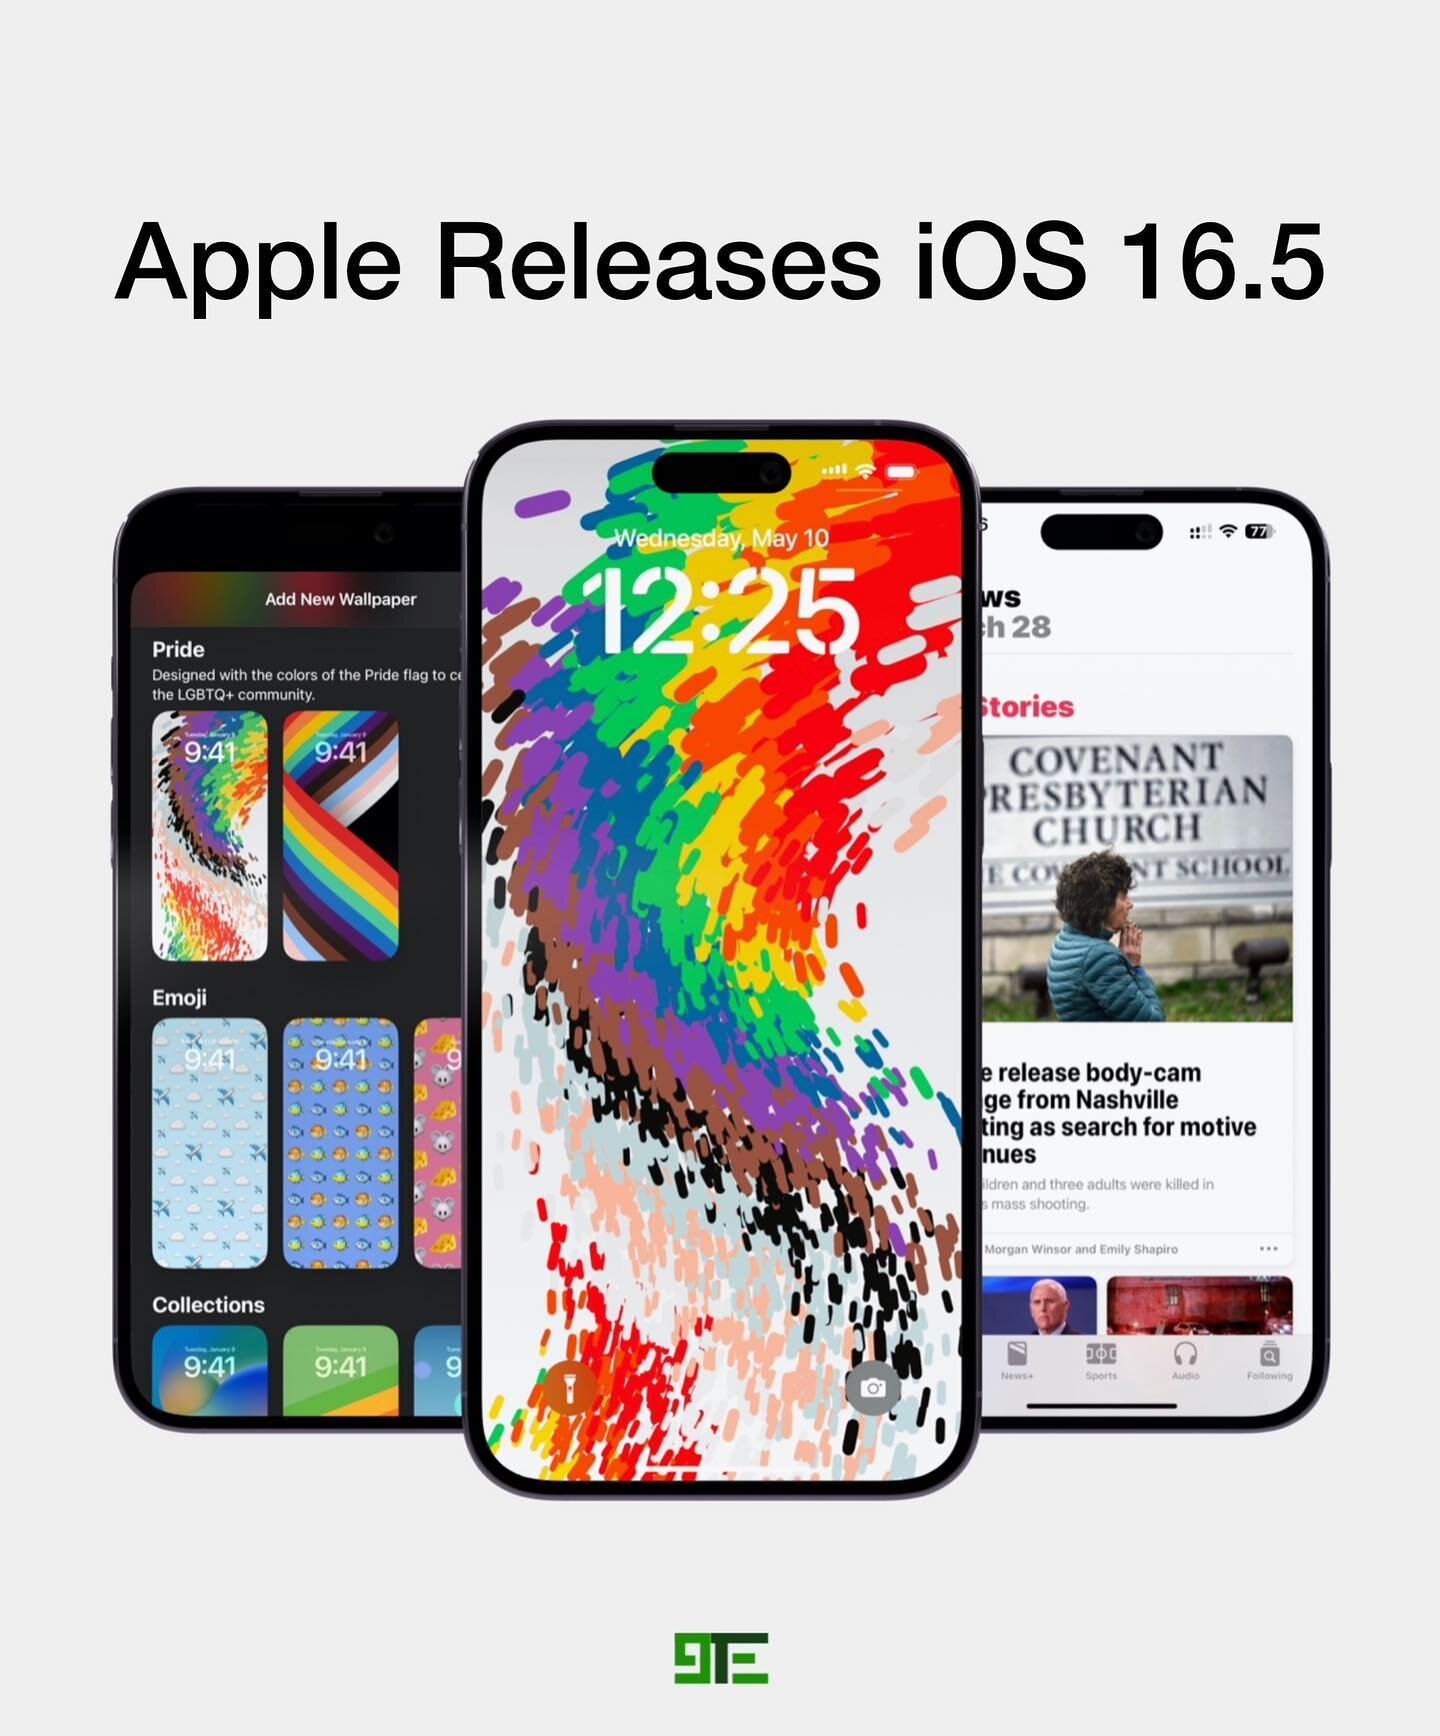 Apple has finally released iOS 16.5 to the public with 
&bull; new wallpaper updates
&bull; updates to the Apple News app with new Sports tab and My Sports section
&bull; Bug fixes on Podcasts in CarPlay, Screen Time and Spotlight Search. 

Follow @9